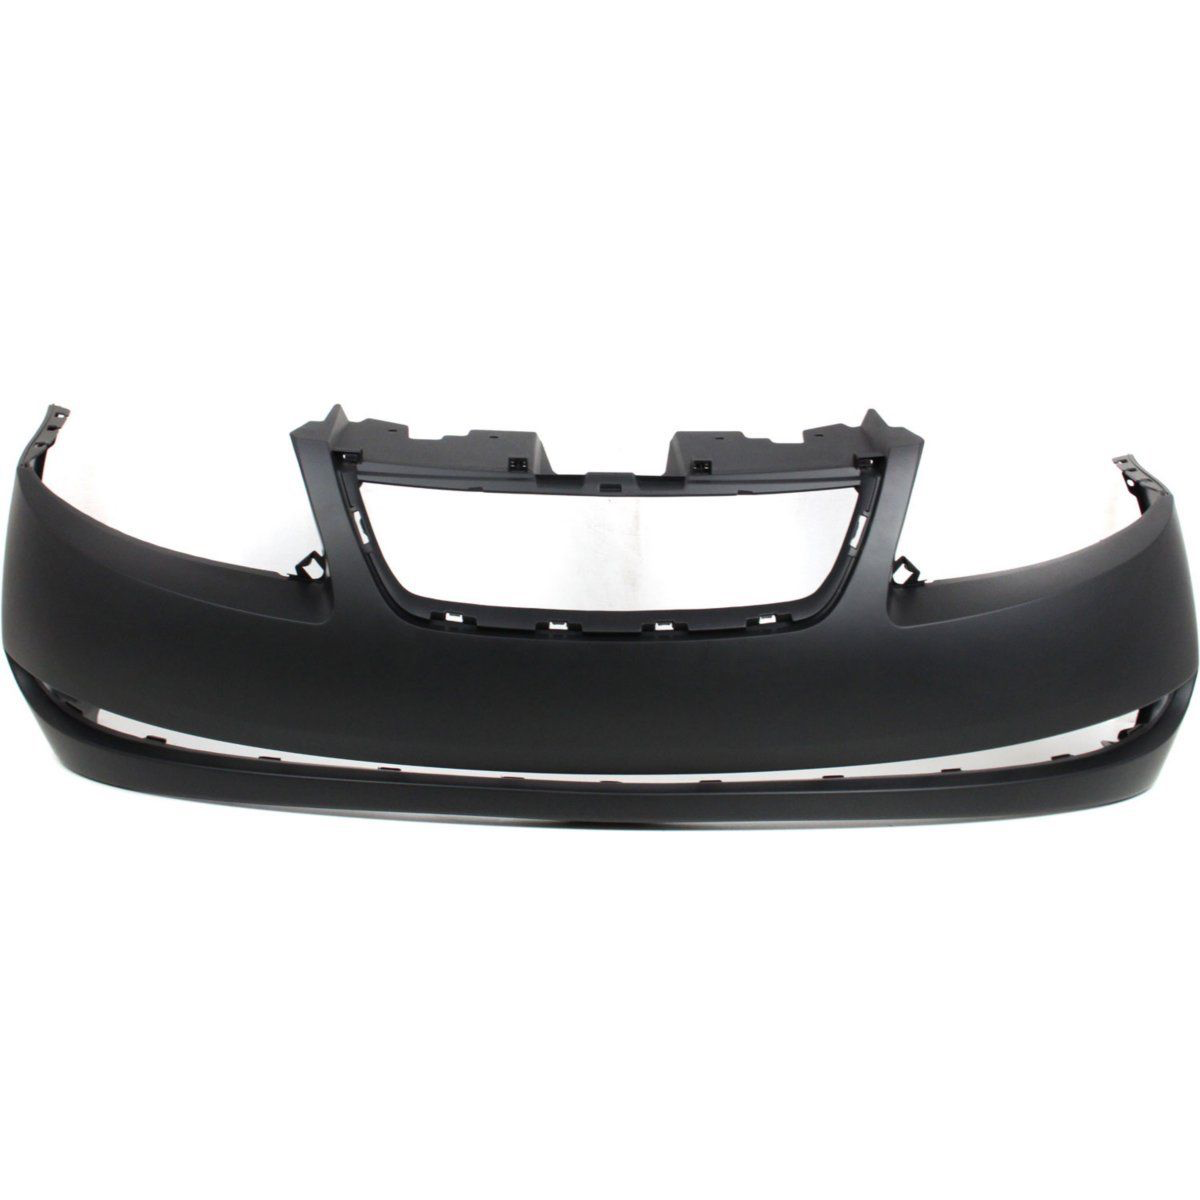 2005-2007 SATURN ION Front Bumper Cover 4dr sedan Painted to Match